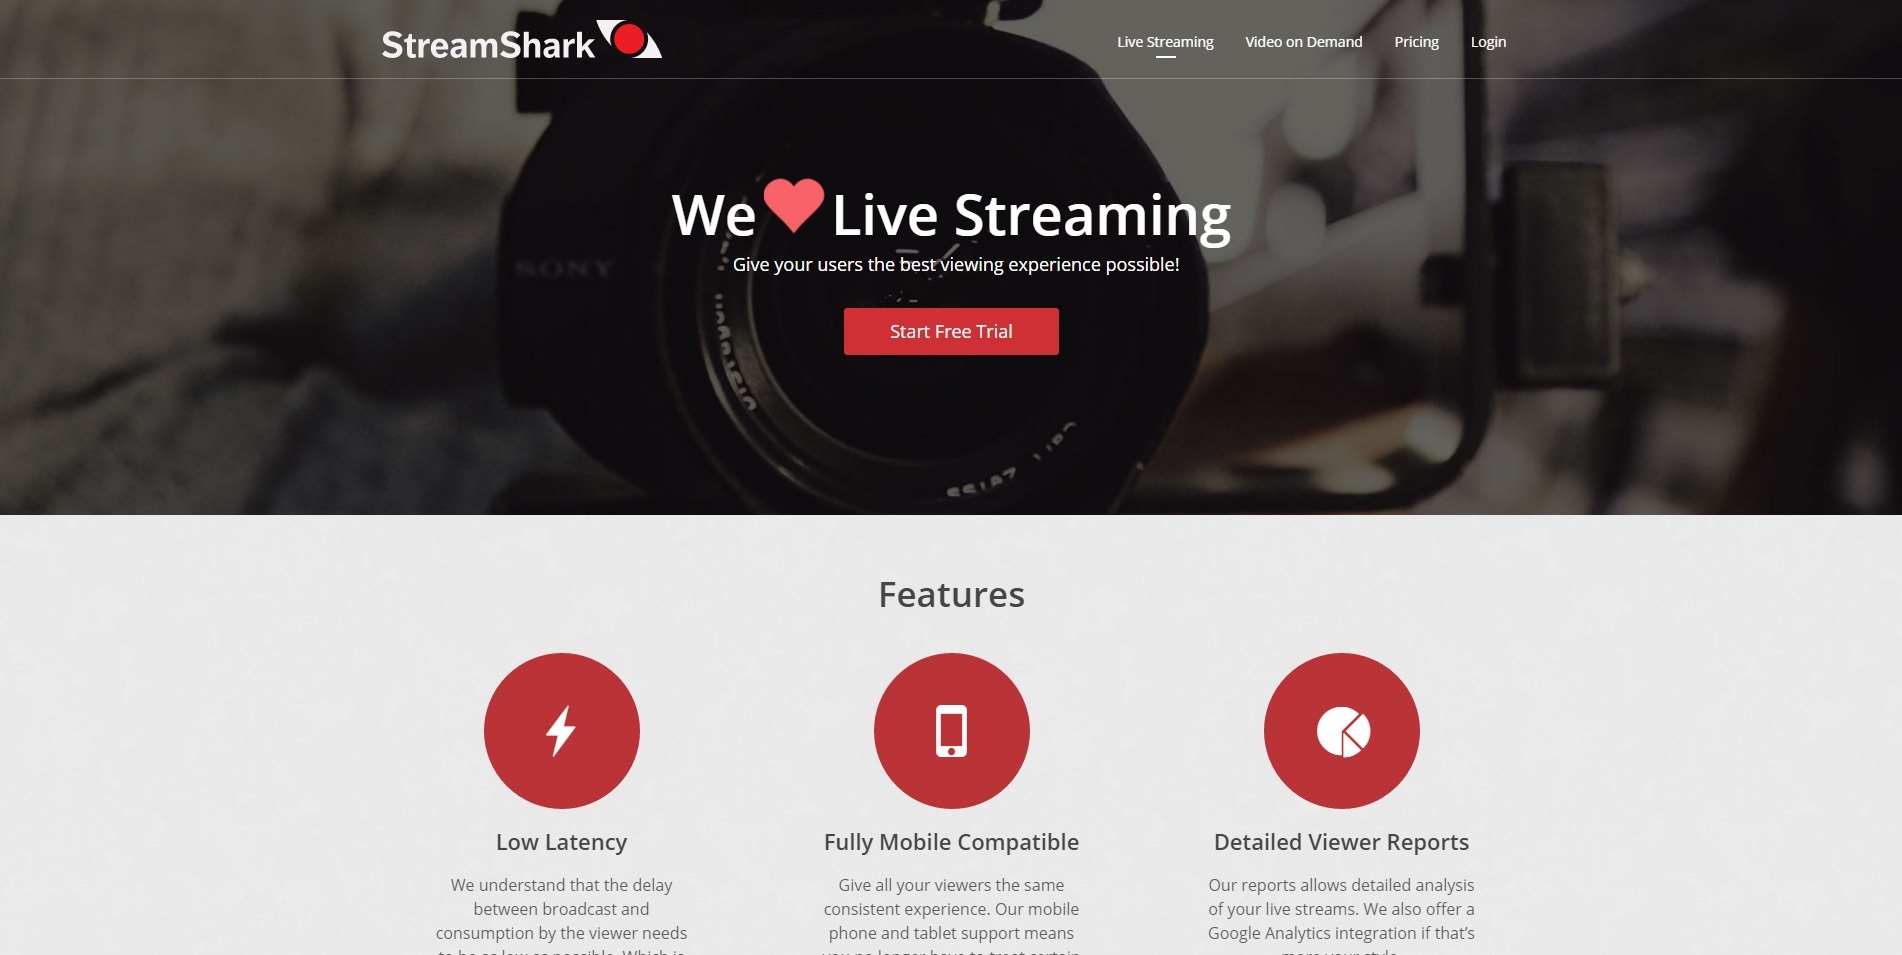 streamshark - Live Streaming Service for Church